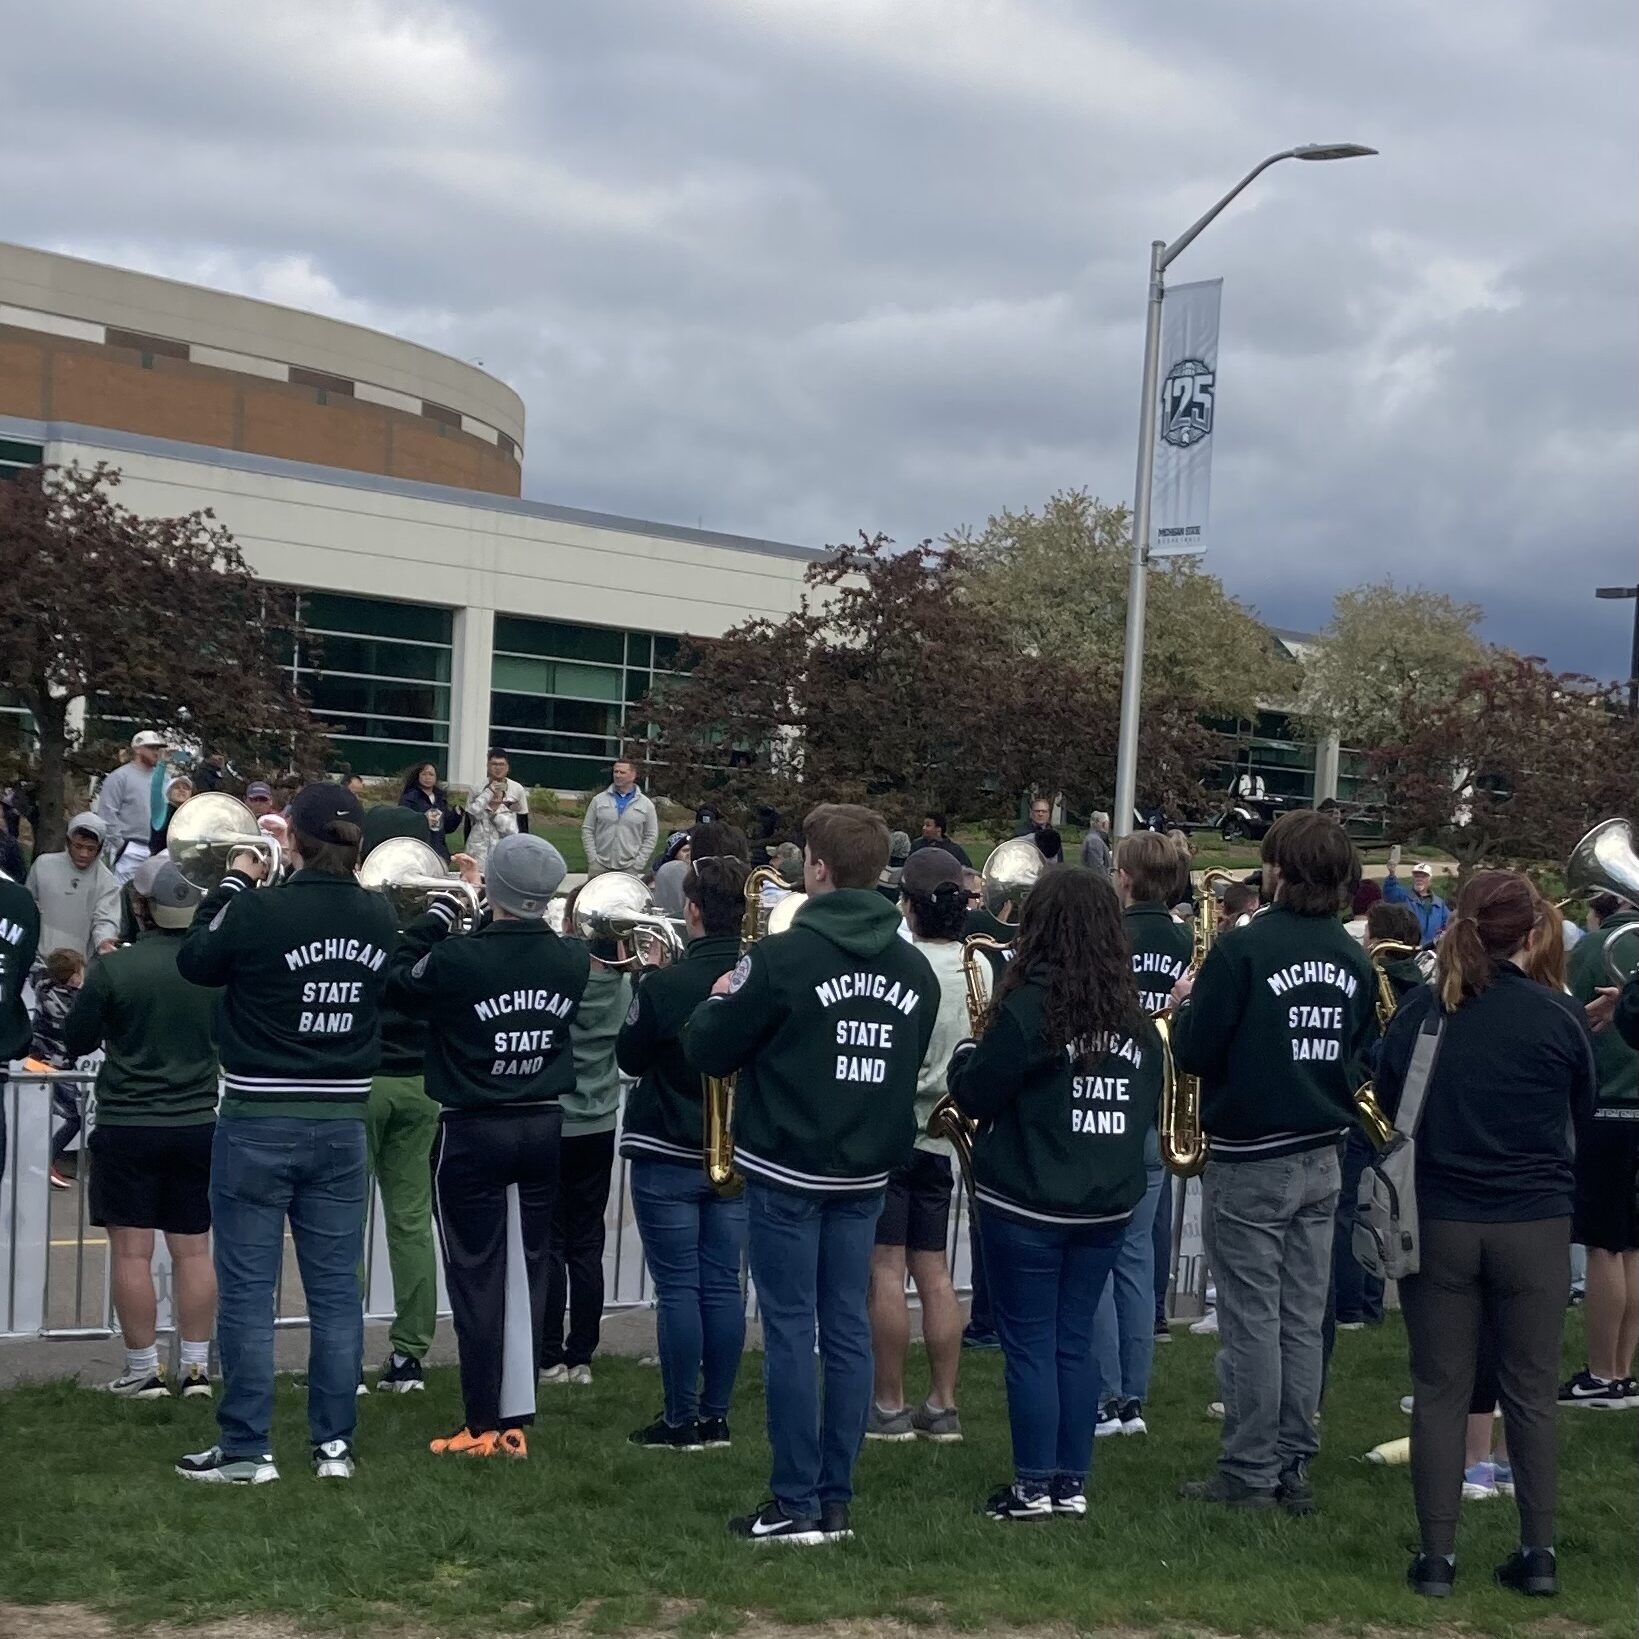 The MSU pep band playing the fight song at the start of the 5K race. Credit: Chris Warren